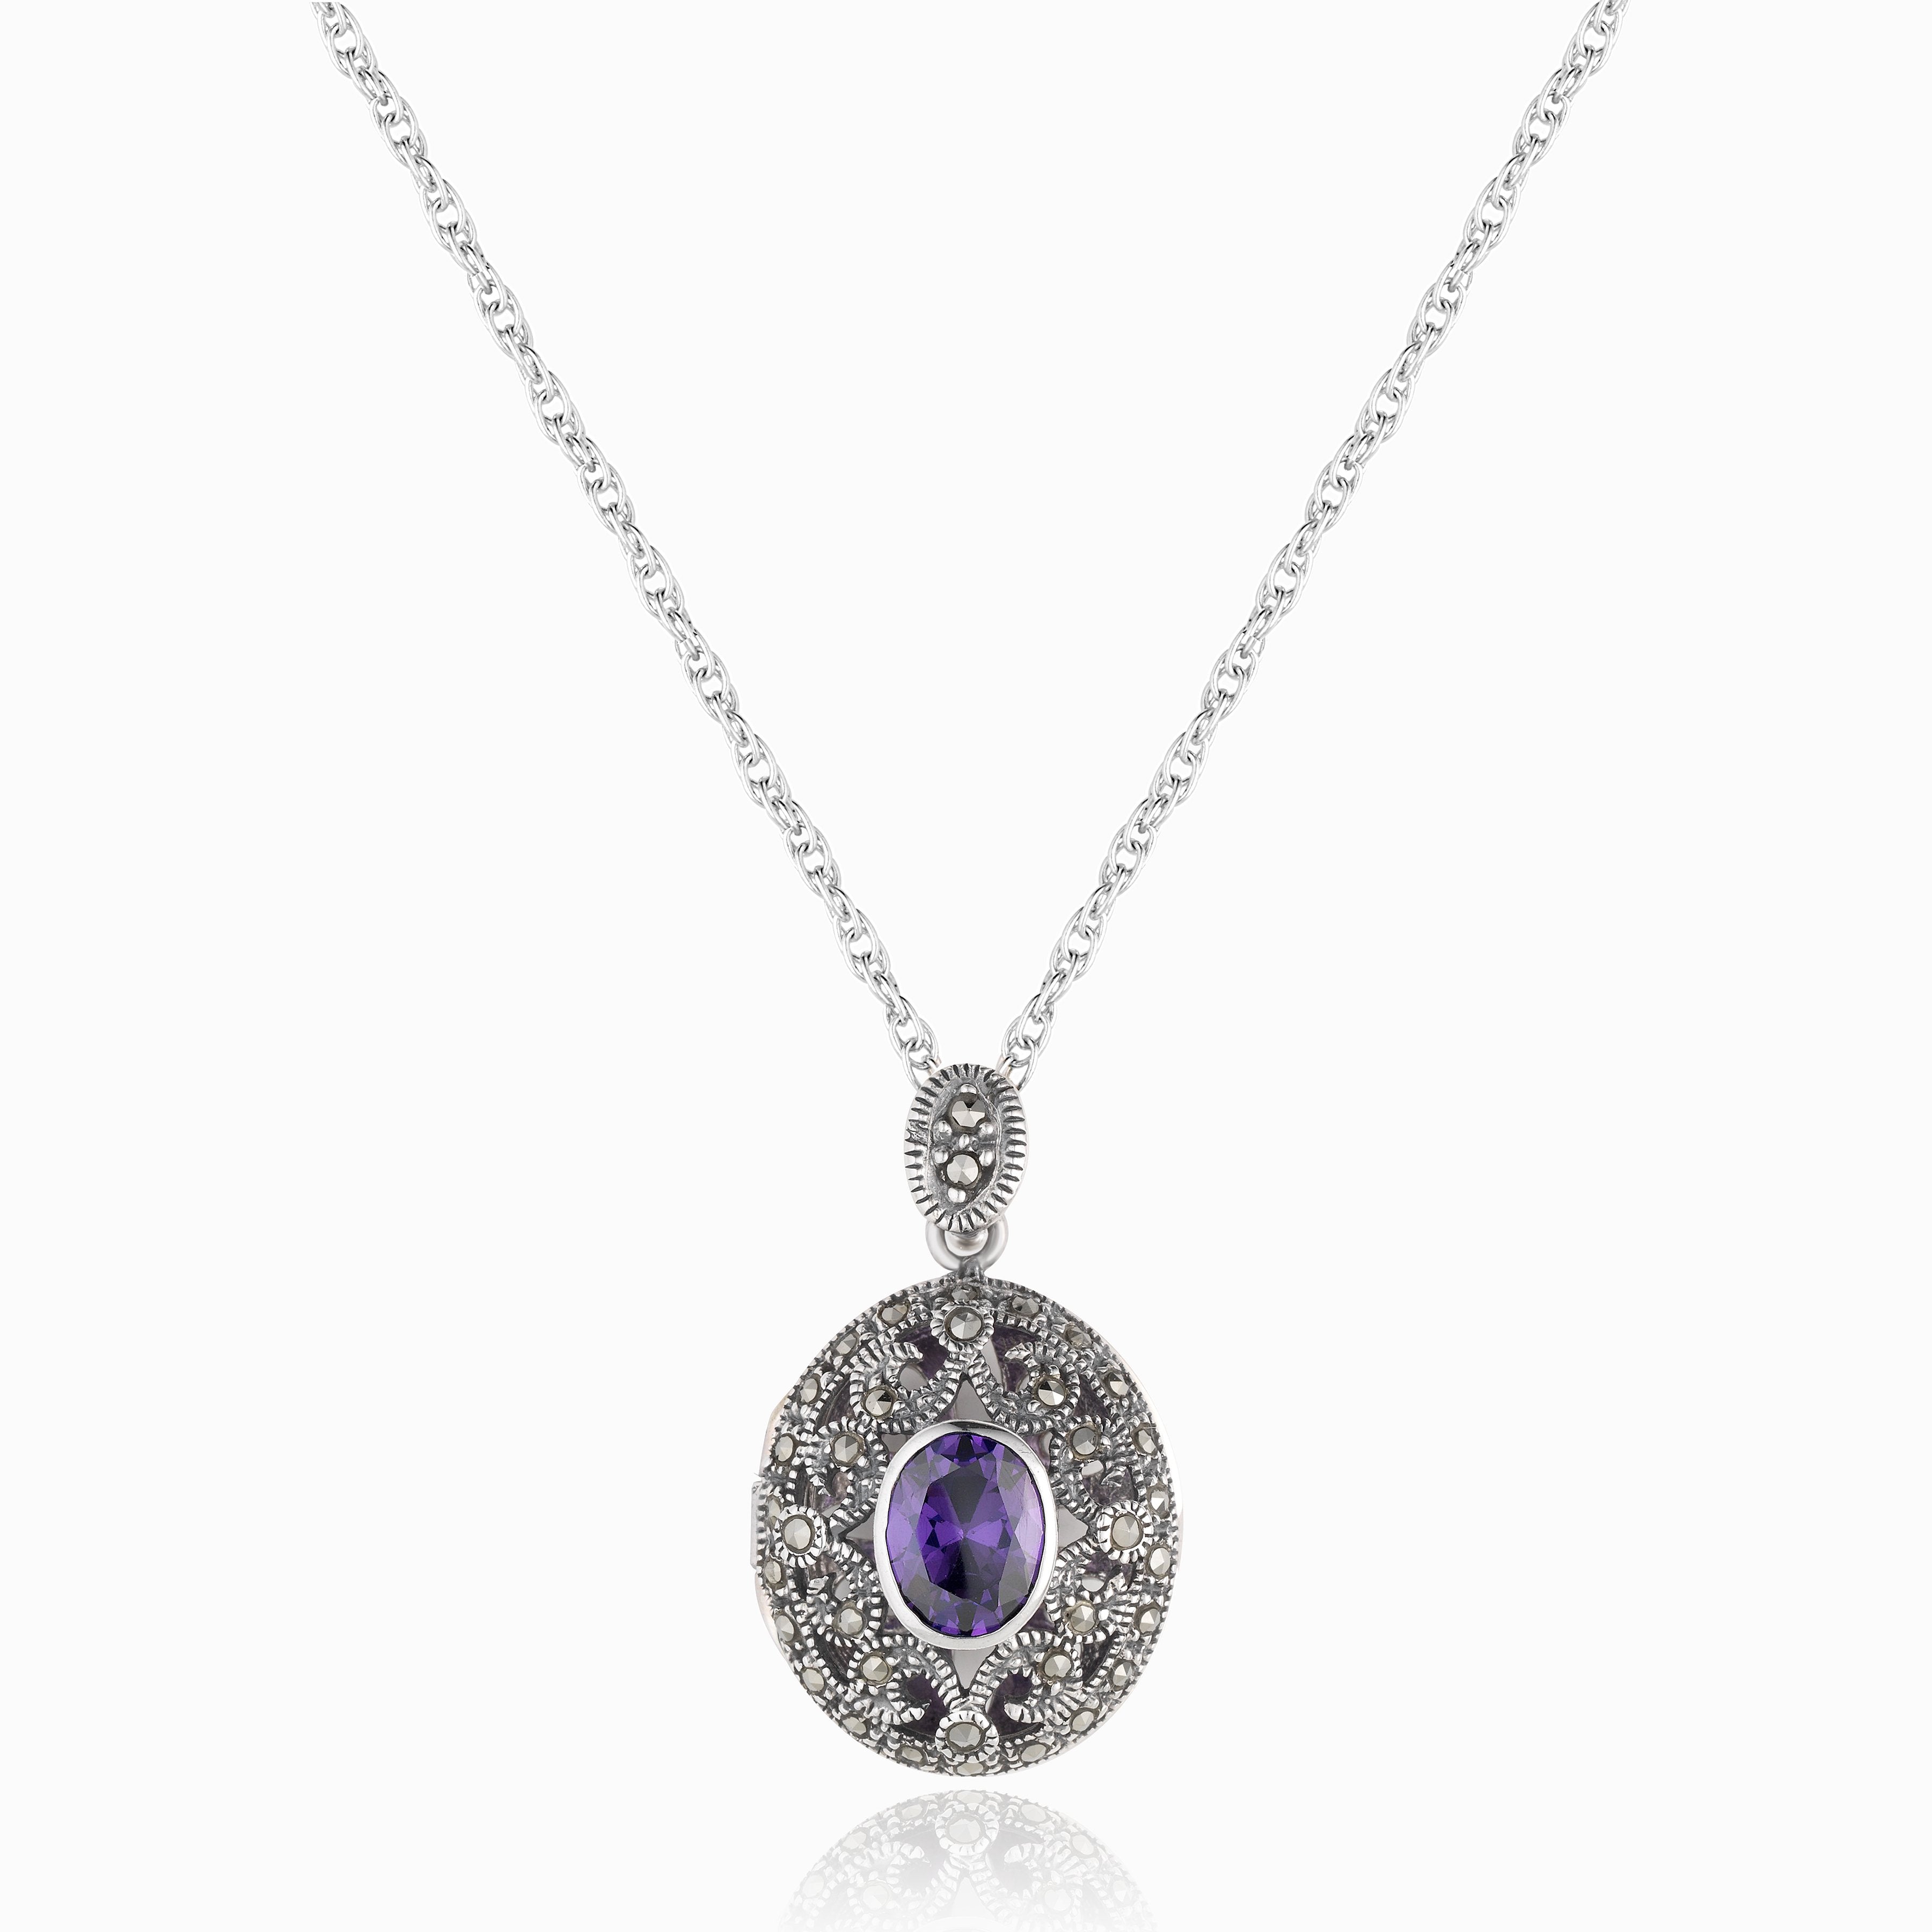 Product title: Marcasite and Amethyst Oval Locket, product type: Locket